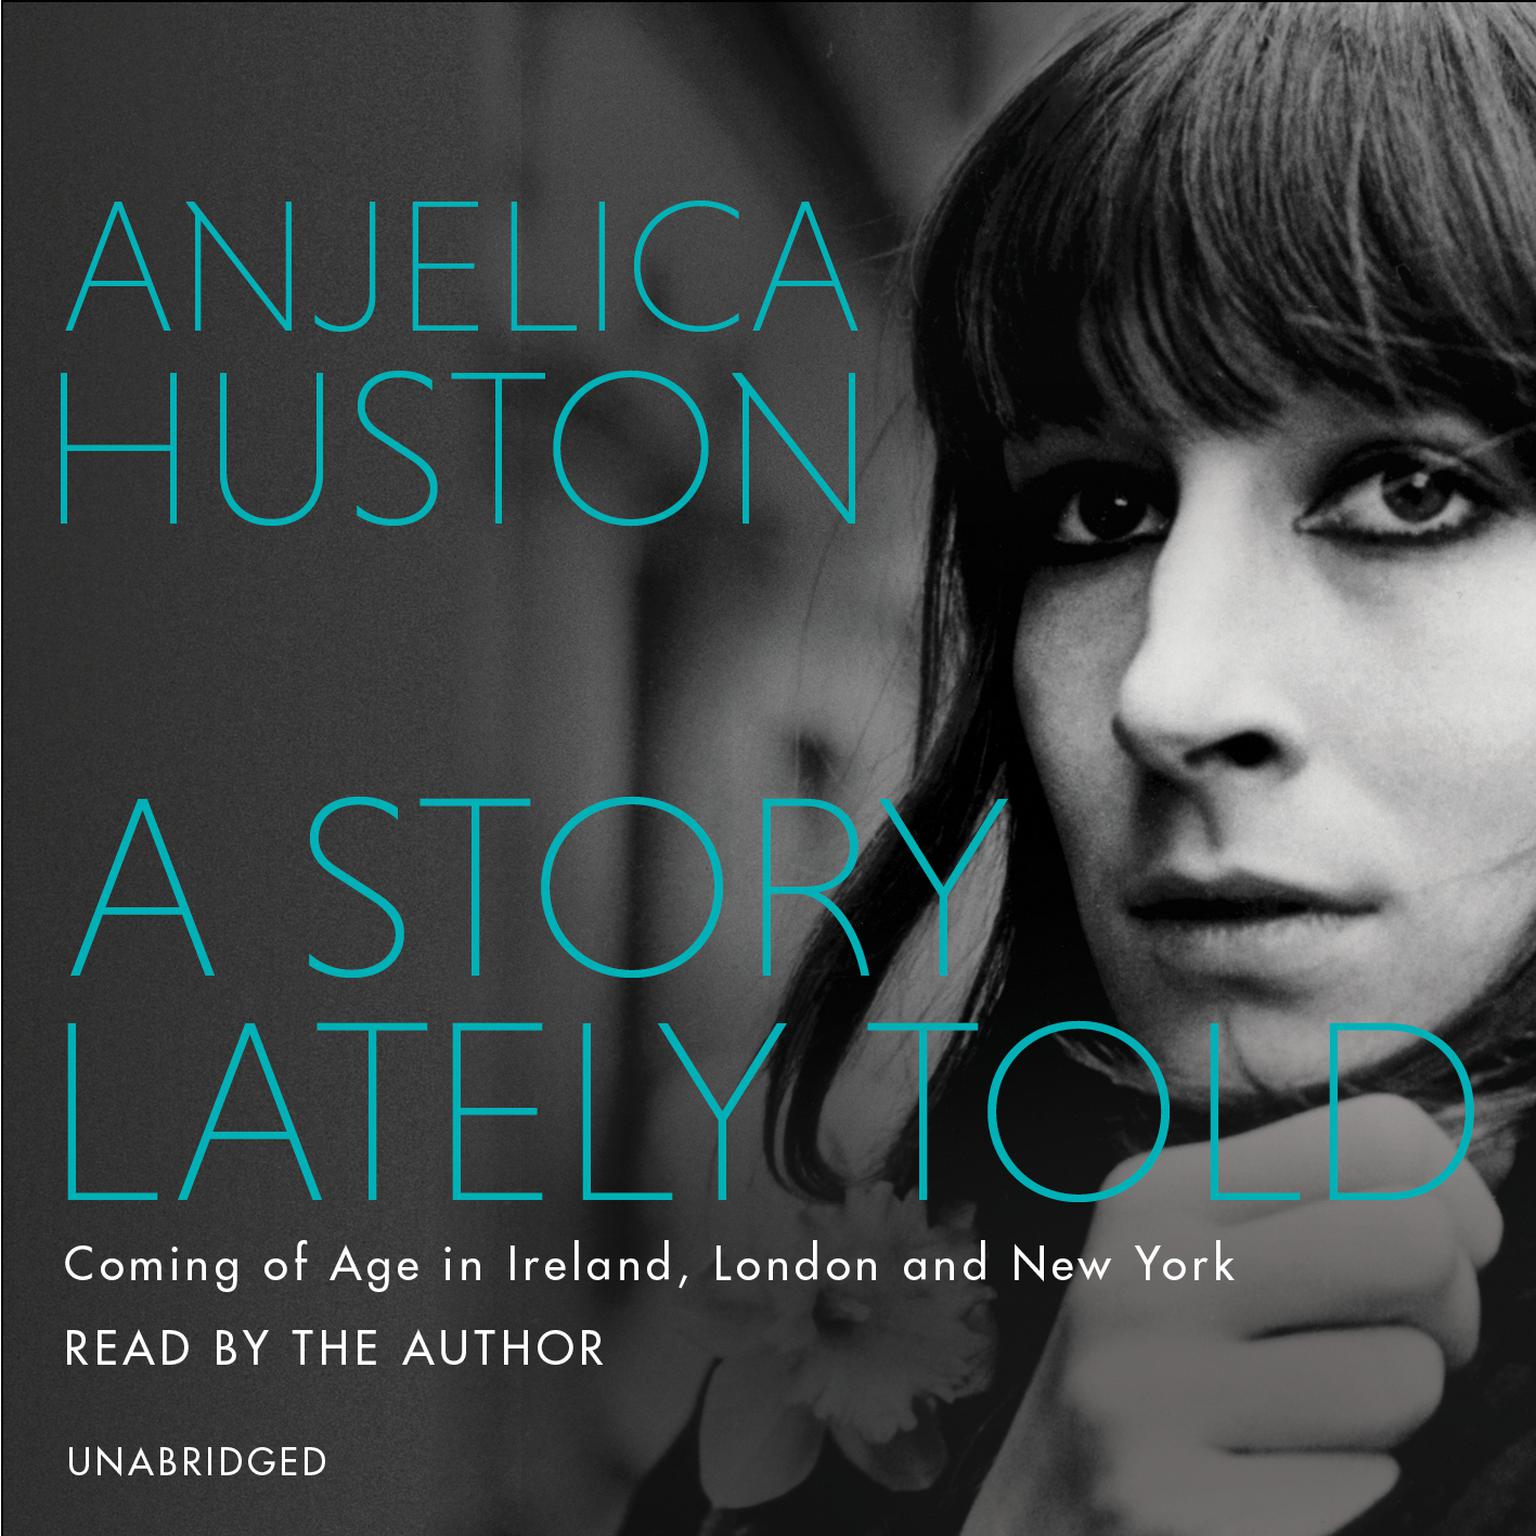 A Story Lately Told: Coming of Age in London, Ireland and New York Audiobook, by Anjelica Huston